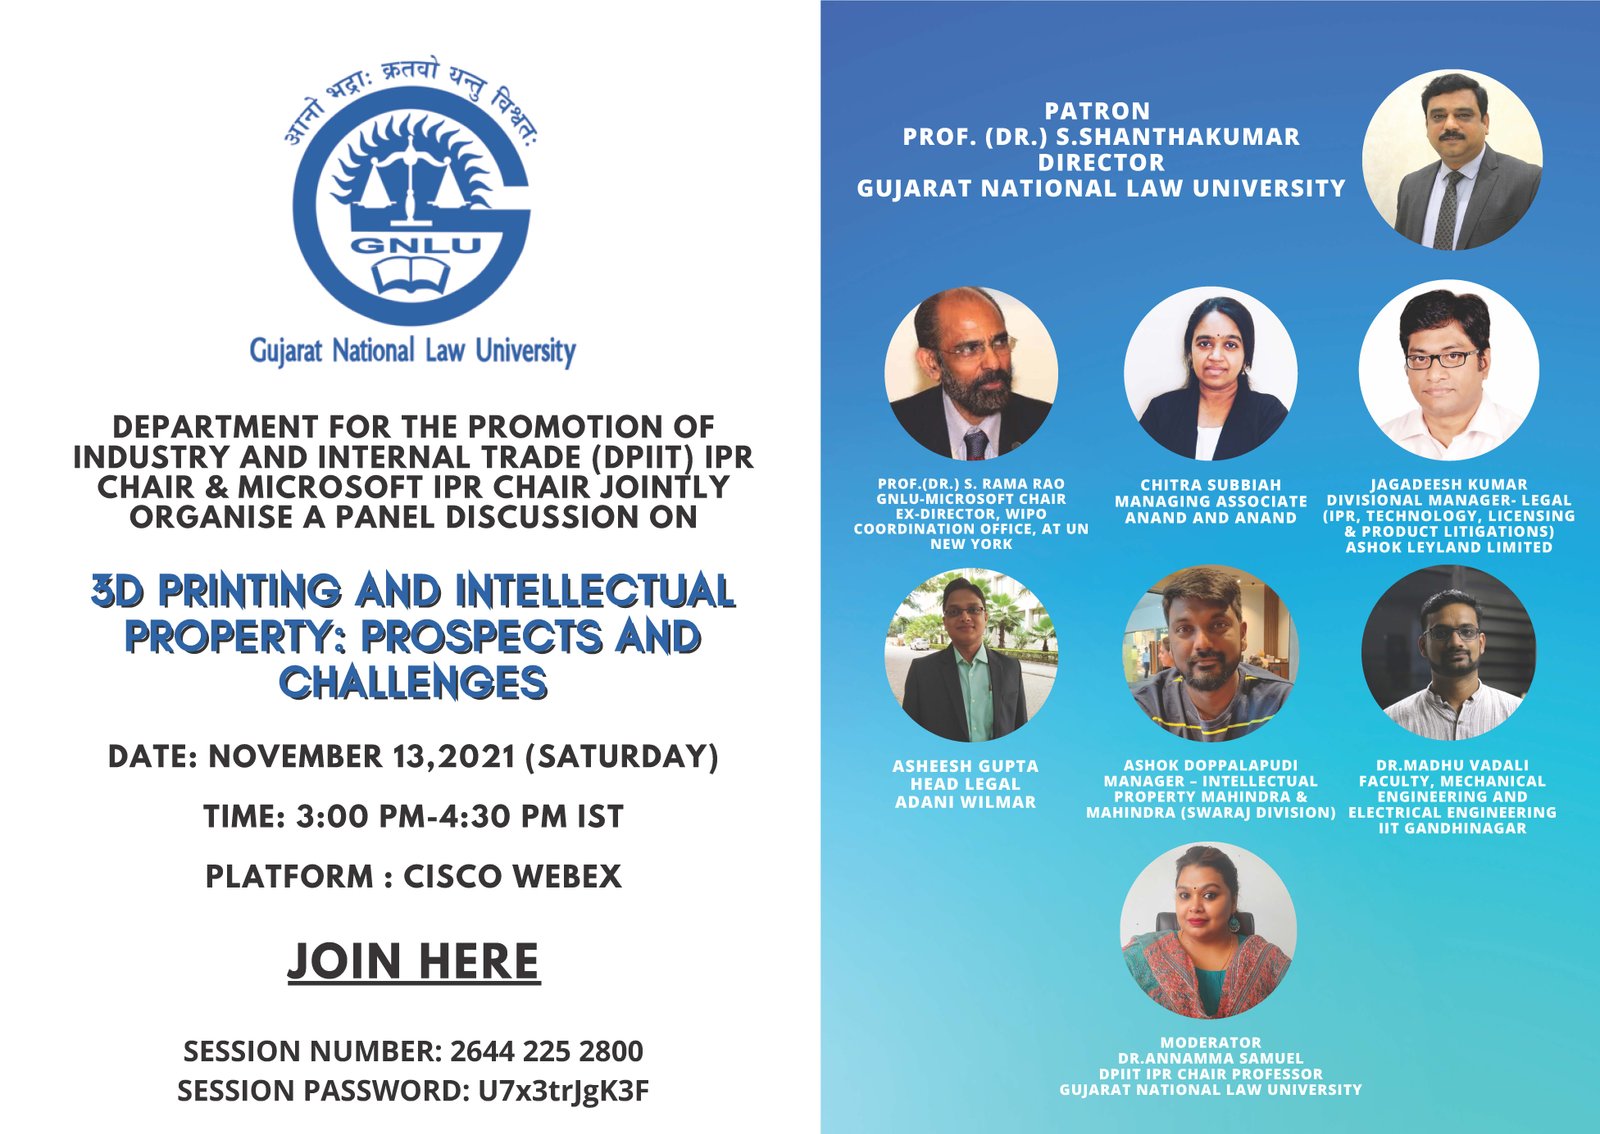 3D Printing And Intellectual Property: Prospects And Challenges - The Law Communicants